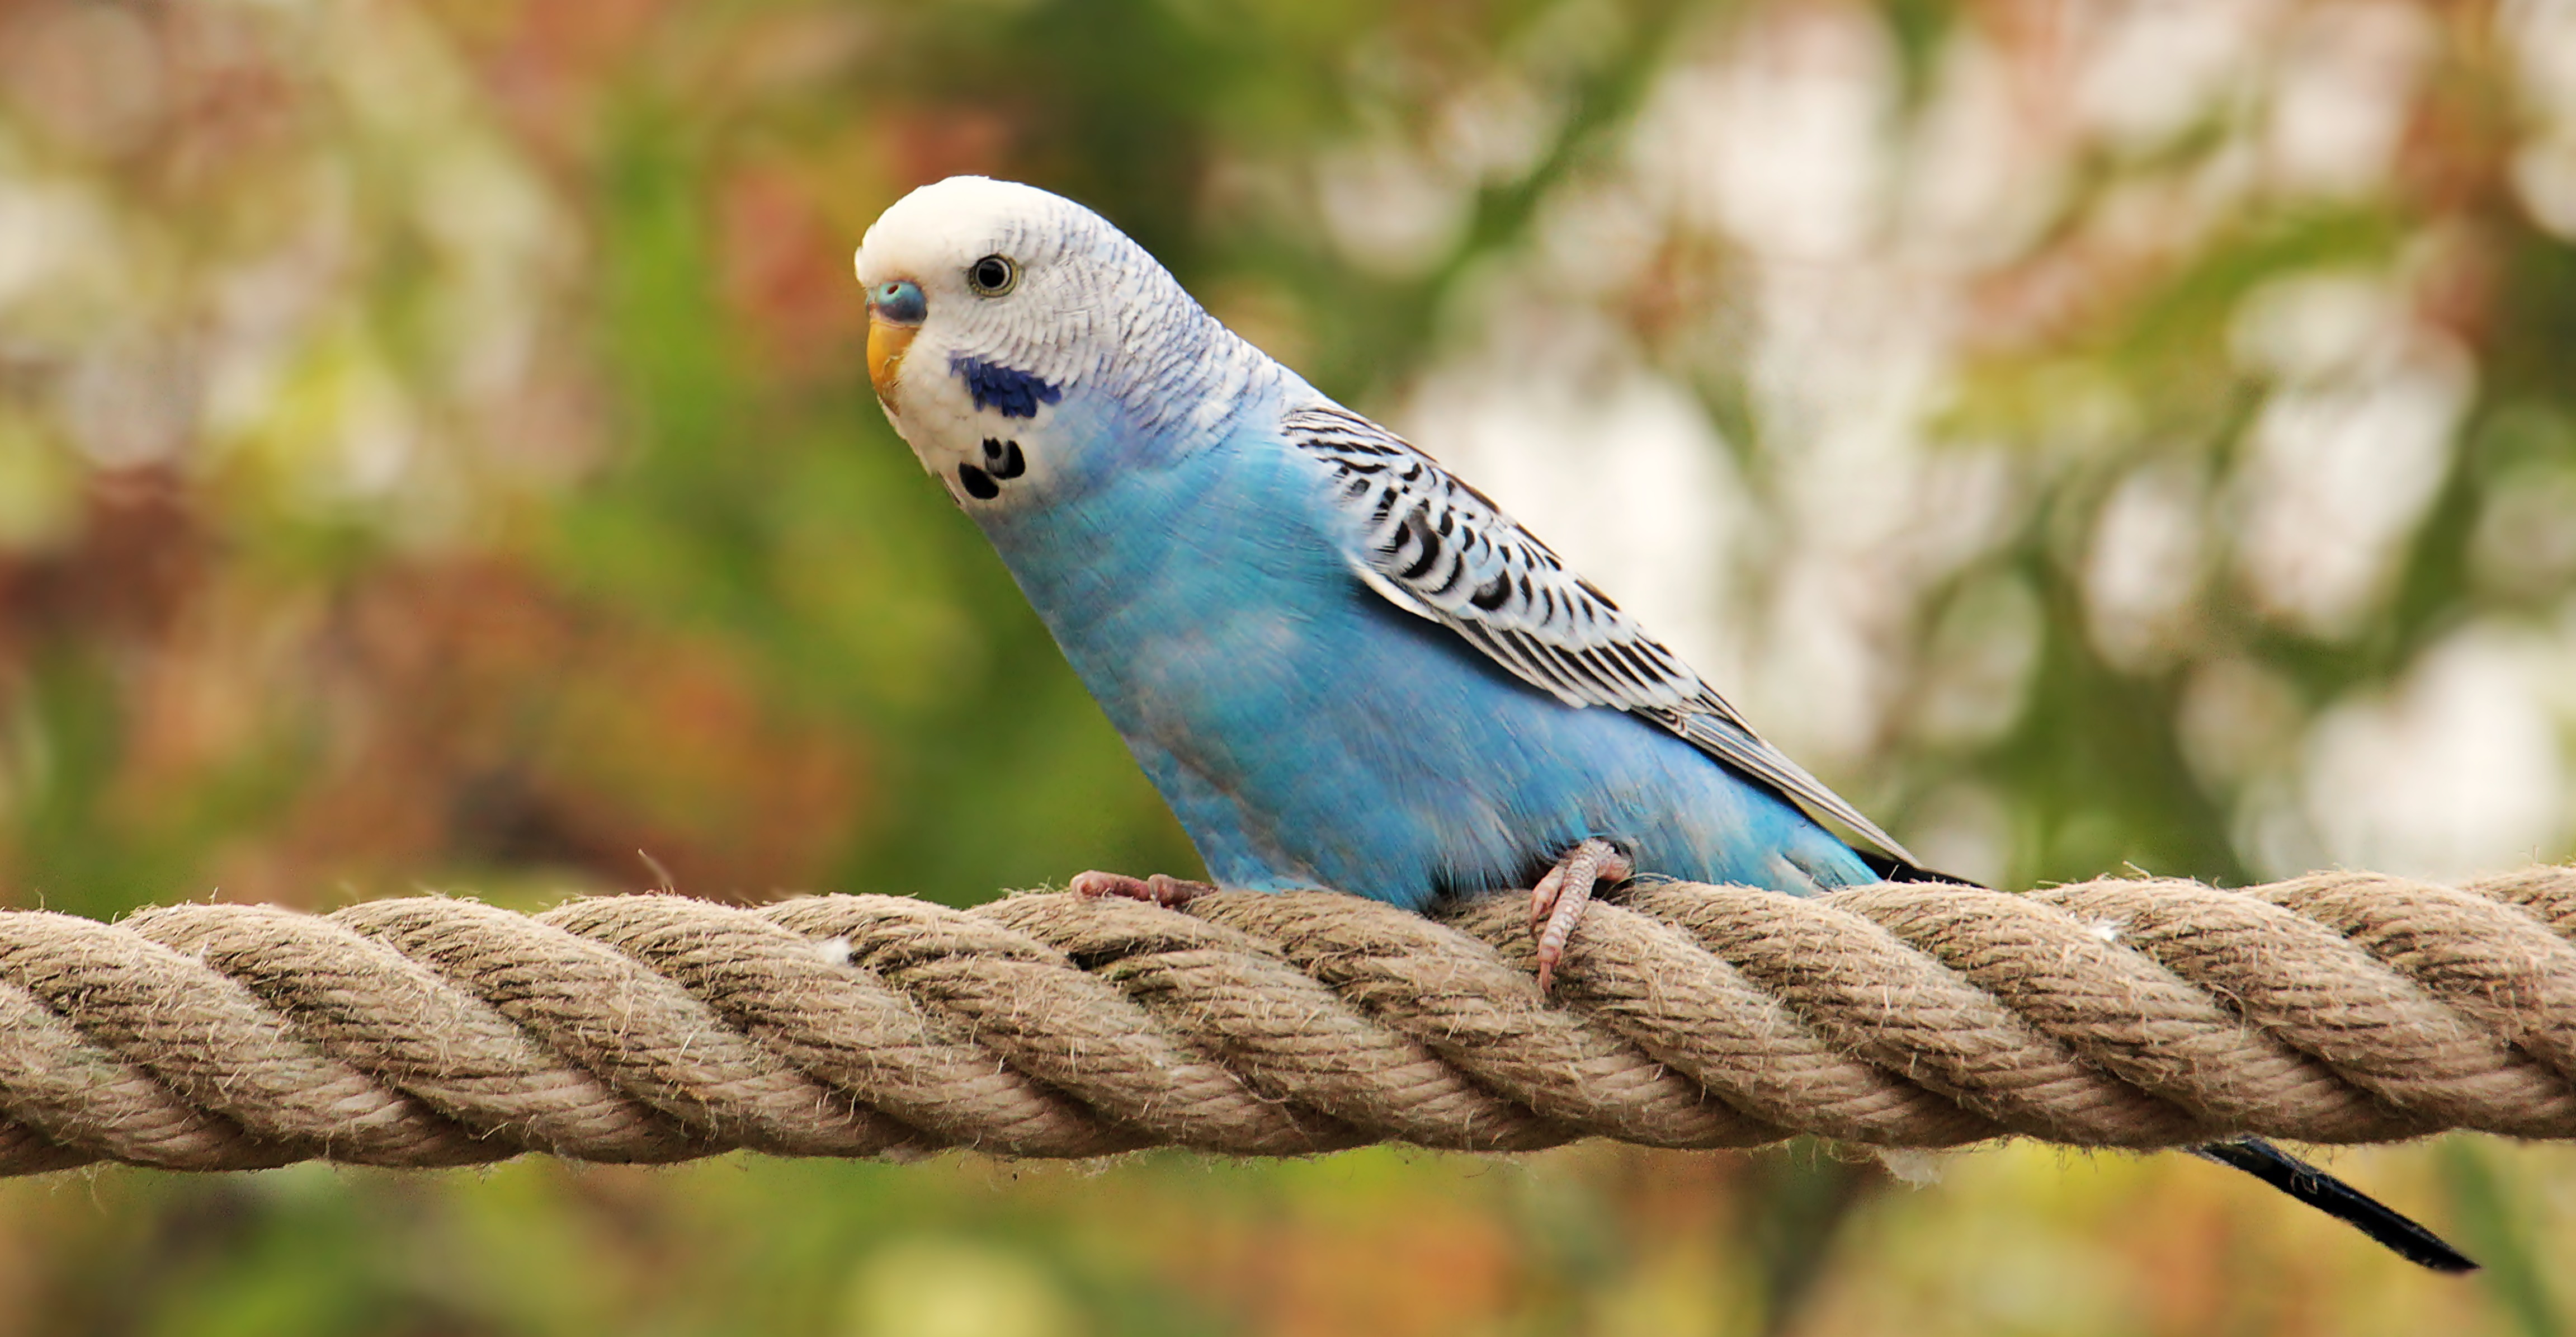 Budgie on the rope photo